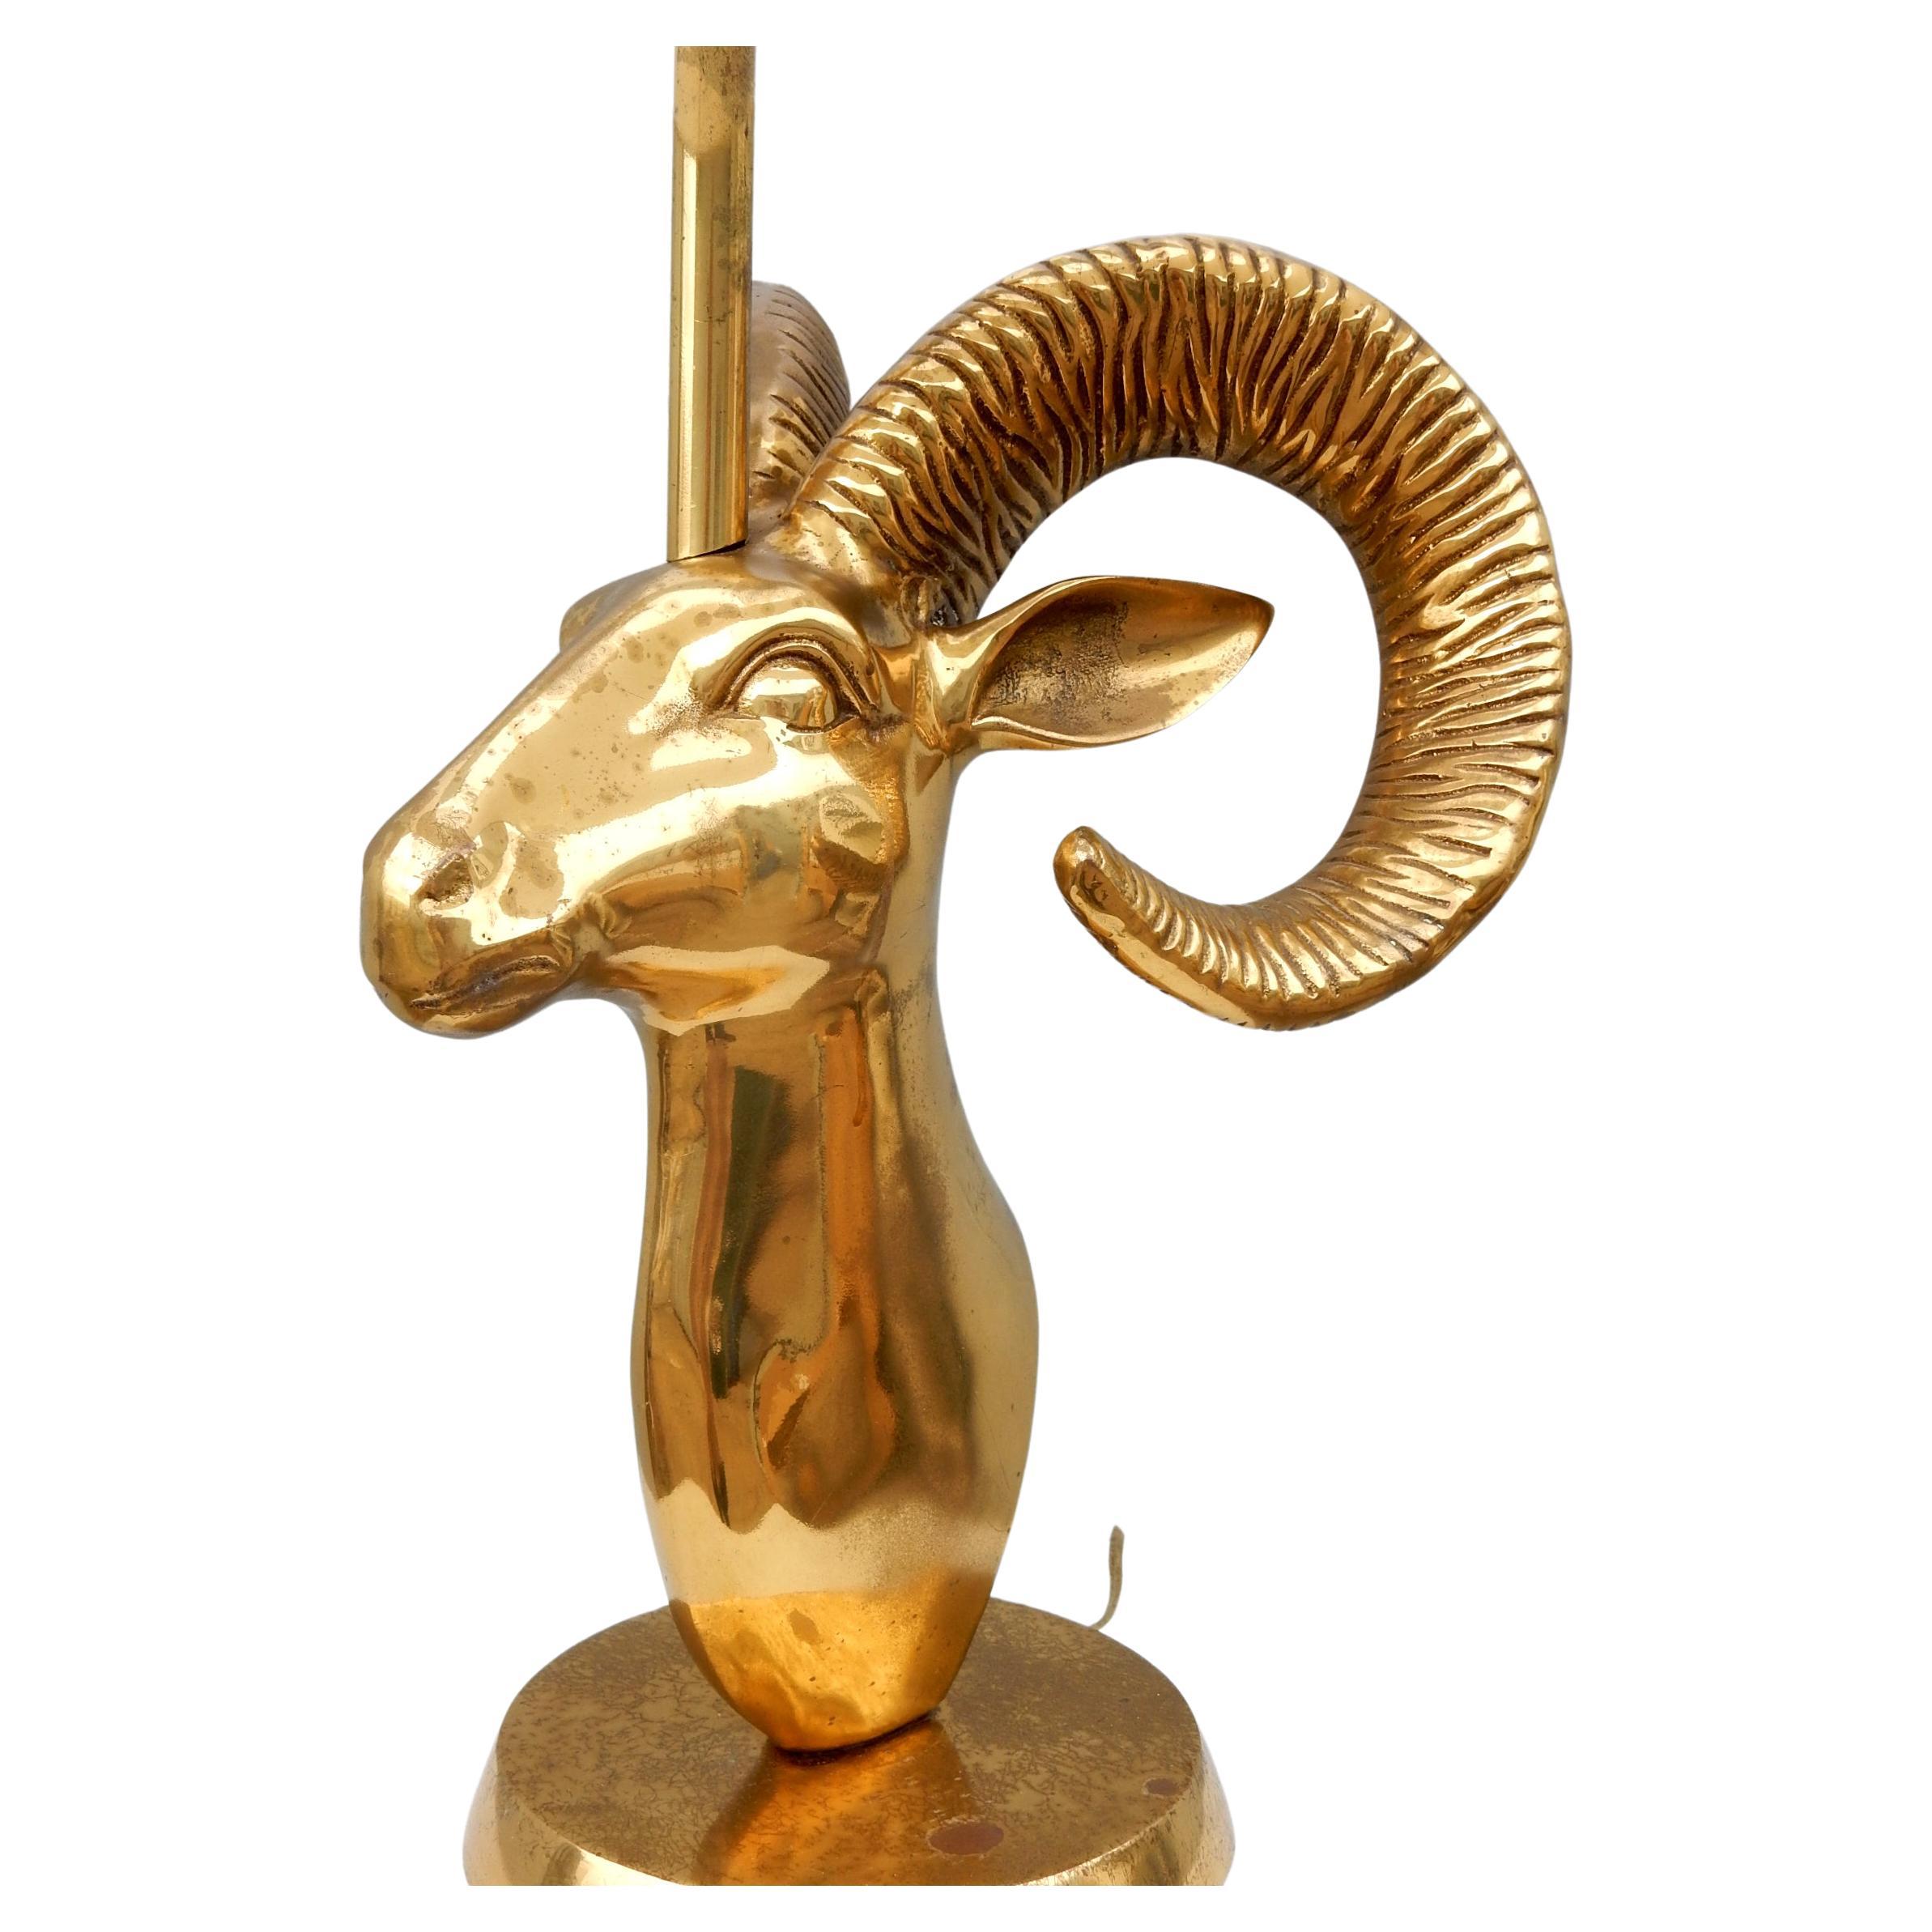 Brass Rocky Mountain Sheep bust sculpture/table lamp. 
A striking piece of functional art from the 1970's.
Bust stands 17 inches tall to tip of horns (31 inch tall to the tip of finial)
Aged patina on brass. No damage, dents etc.
Perfect working